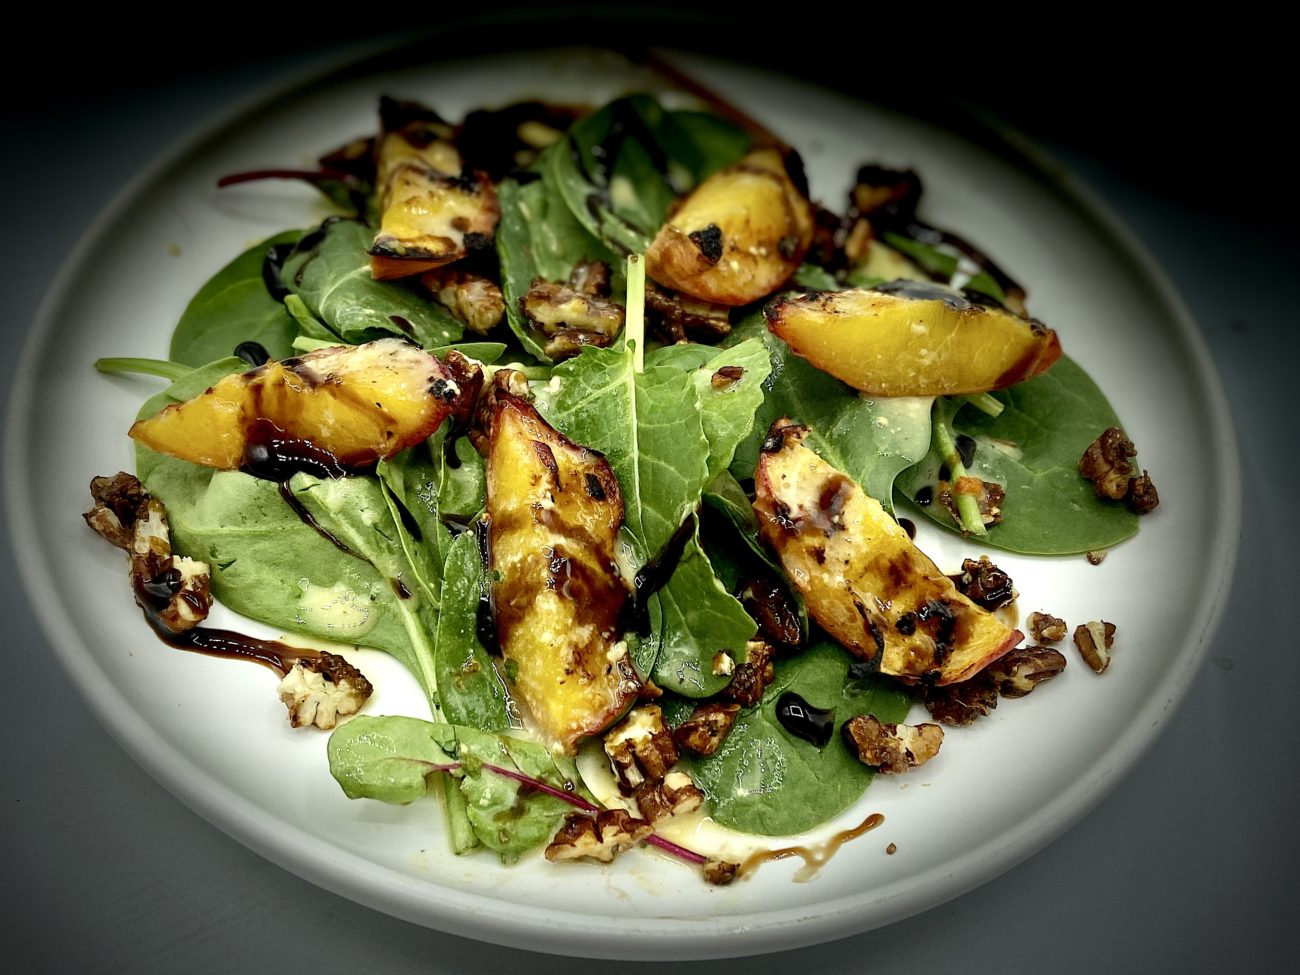 Grilled Peach Salad with Caramelized Pecans and Chili Dressing